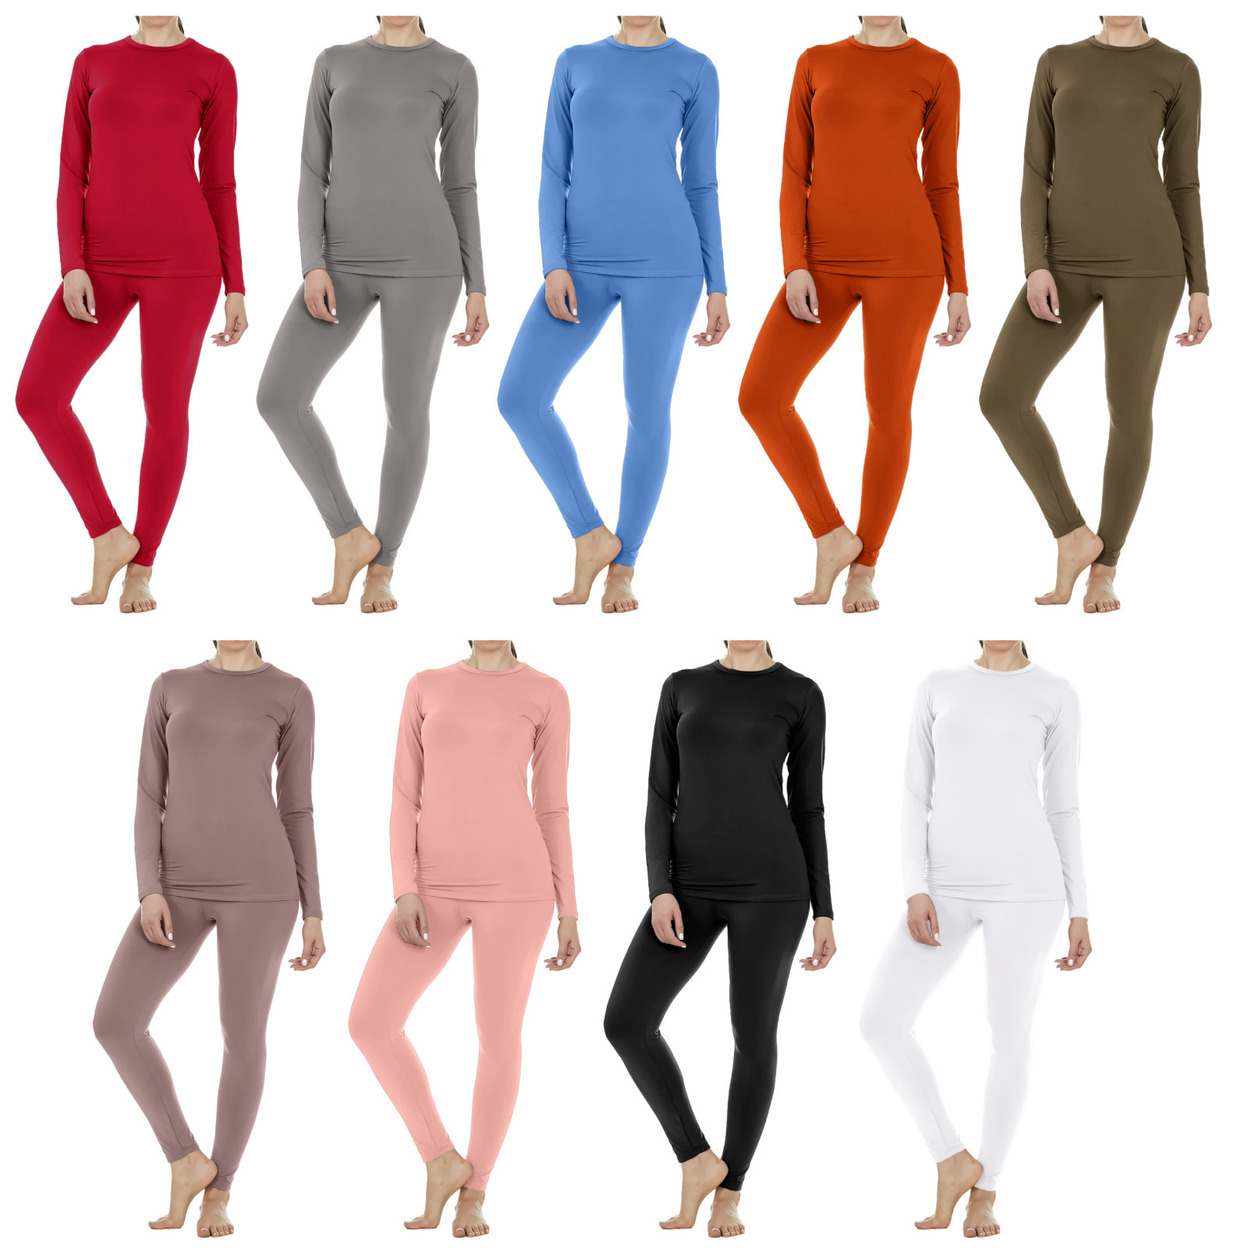 3-Sets: Women's Fleece Lined Winter Warm Soft Thermal Sets For Cold Weather - Xx-large